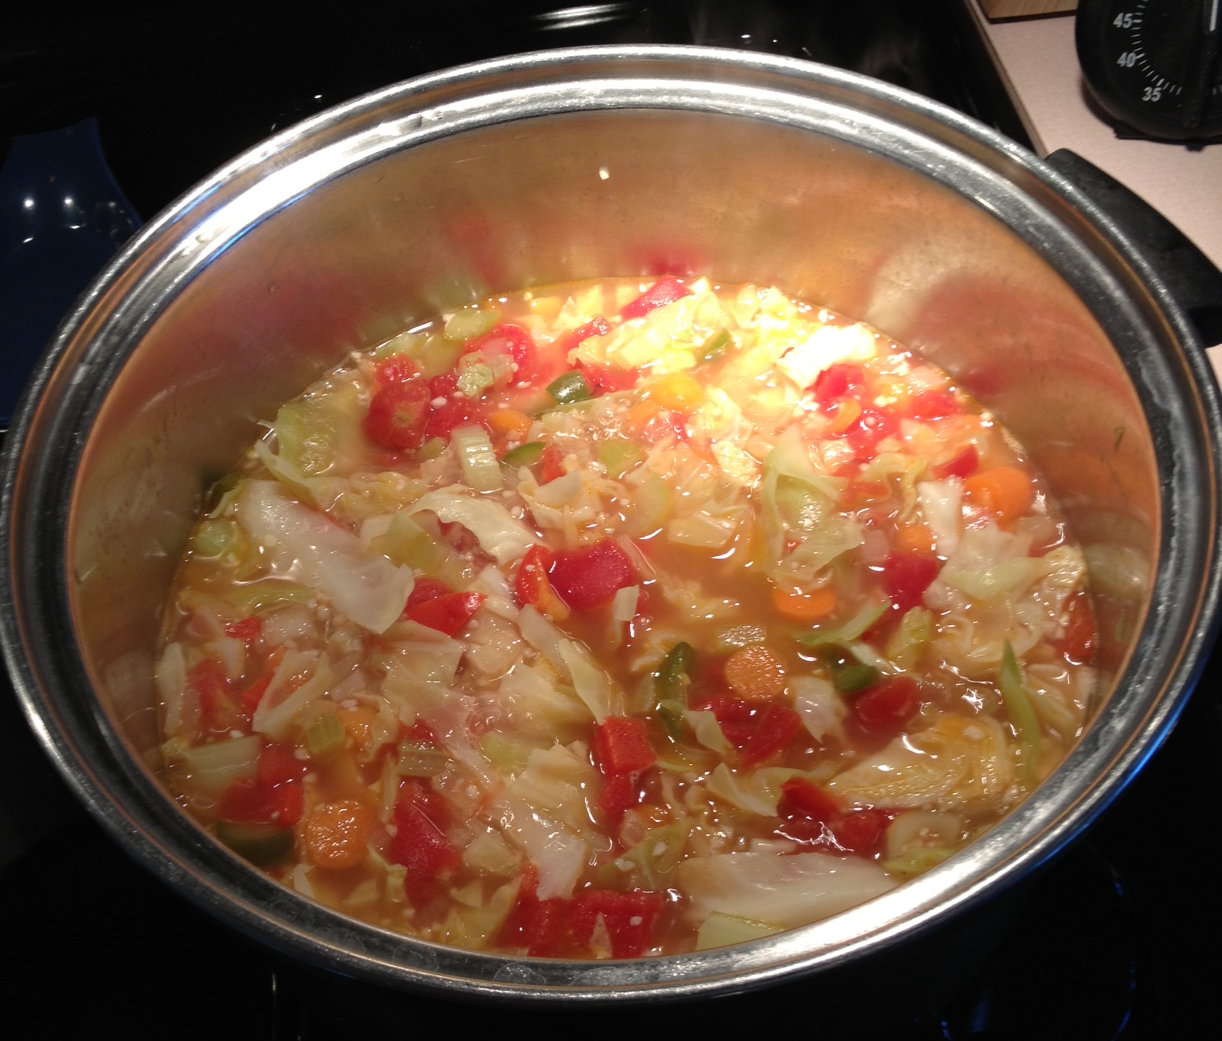 dr oz cabbage soup 7 day diet recipe